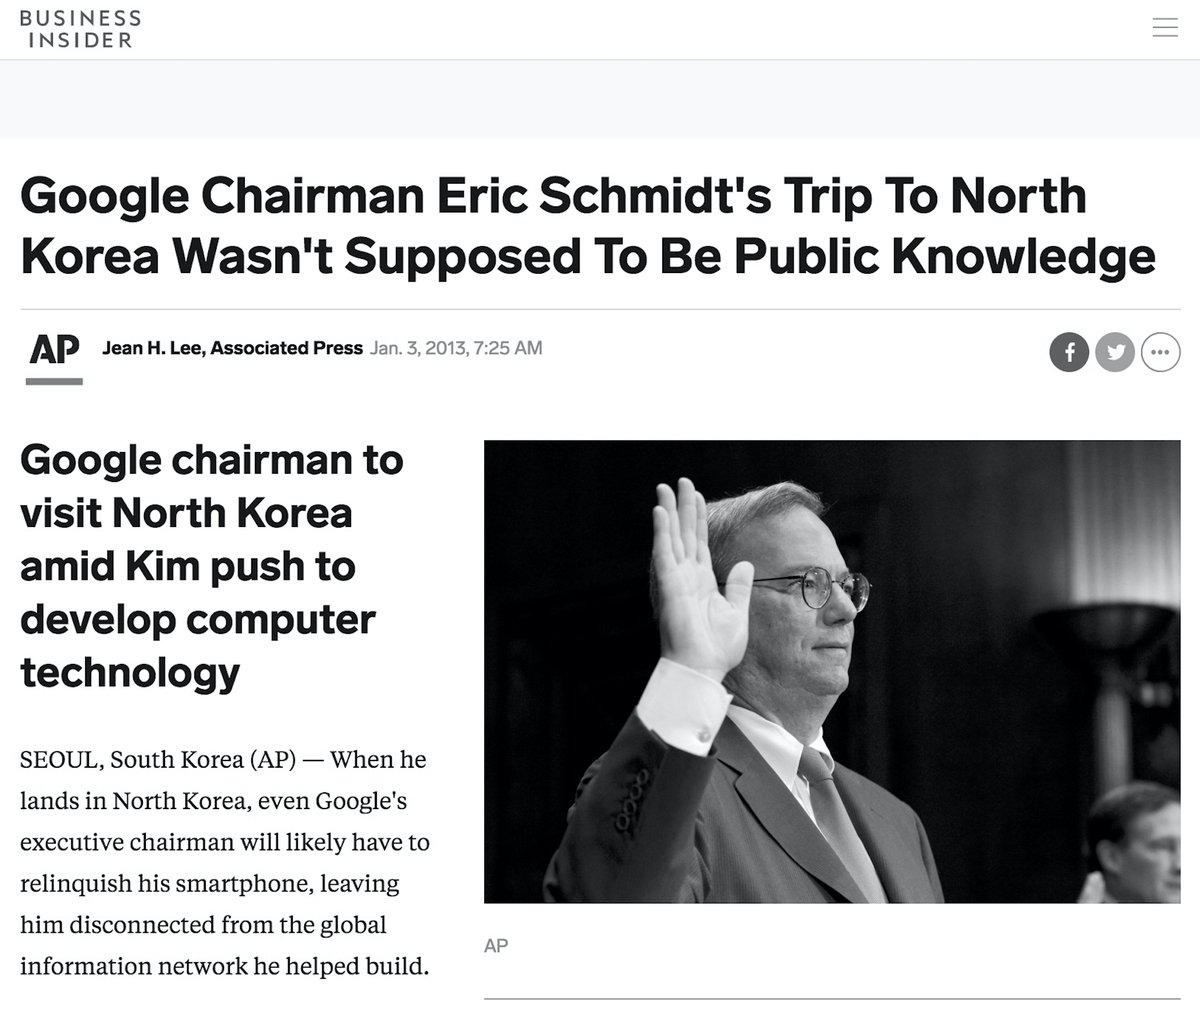 No Scandals, Right? Barry??How Is This Not Treason?AP, January 3, 2013[Don’t Trust AP, Or Business Insider. This Is For Perspective.] https://www.businessinsider.com/google-chairmans-trip-to-north-korea-2013-1?r=US&IR=T&IR=T